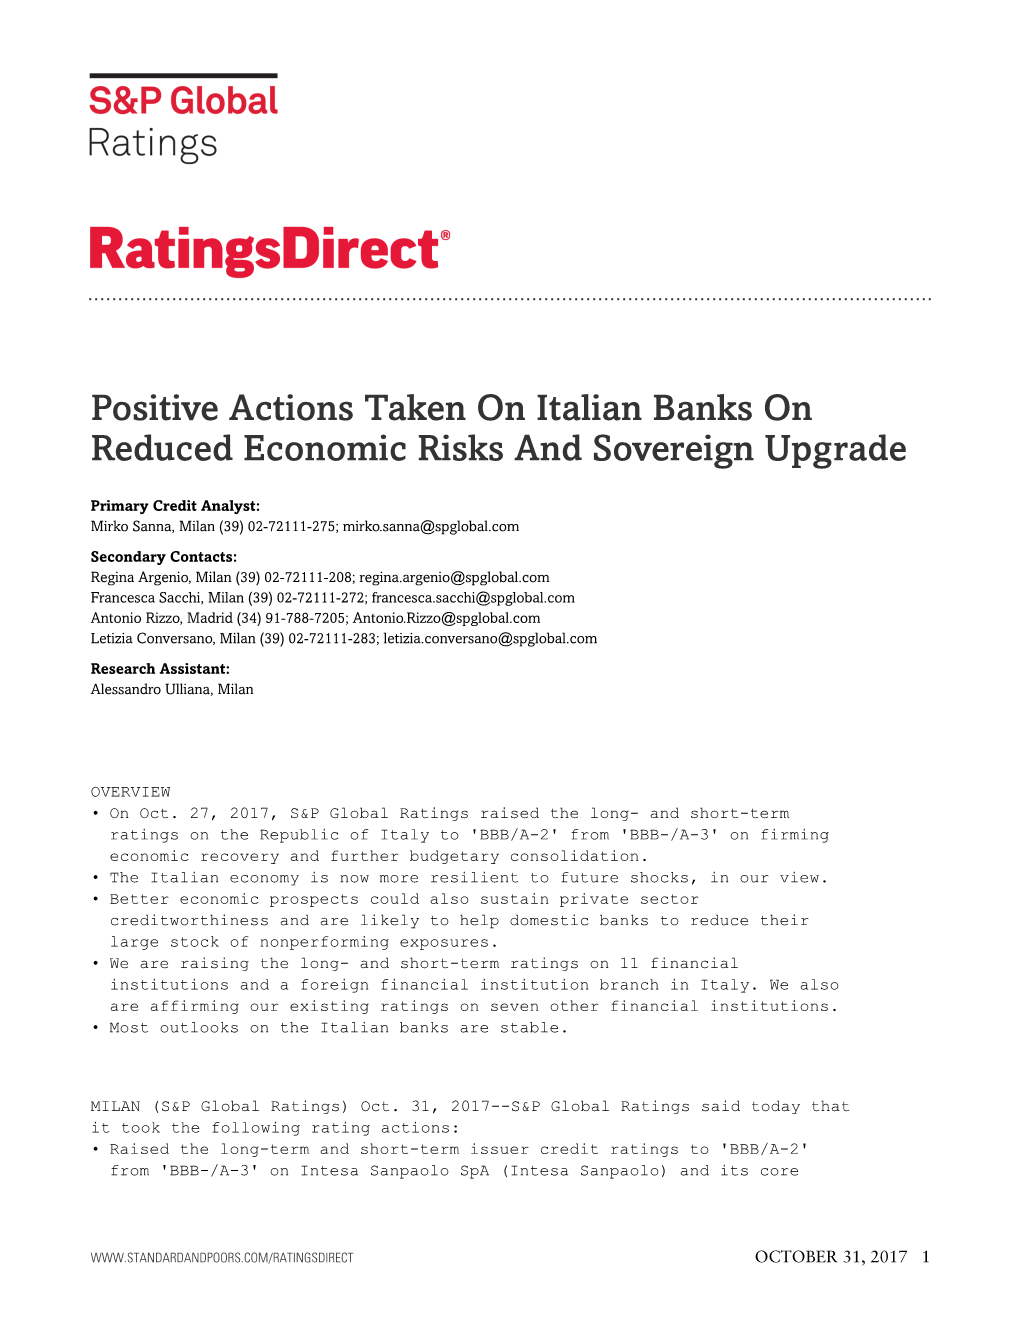 Positive Actions Taken on Italian Banks on Reduced Economic Risks and Sovereign Upgrade